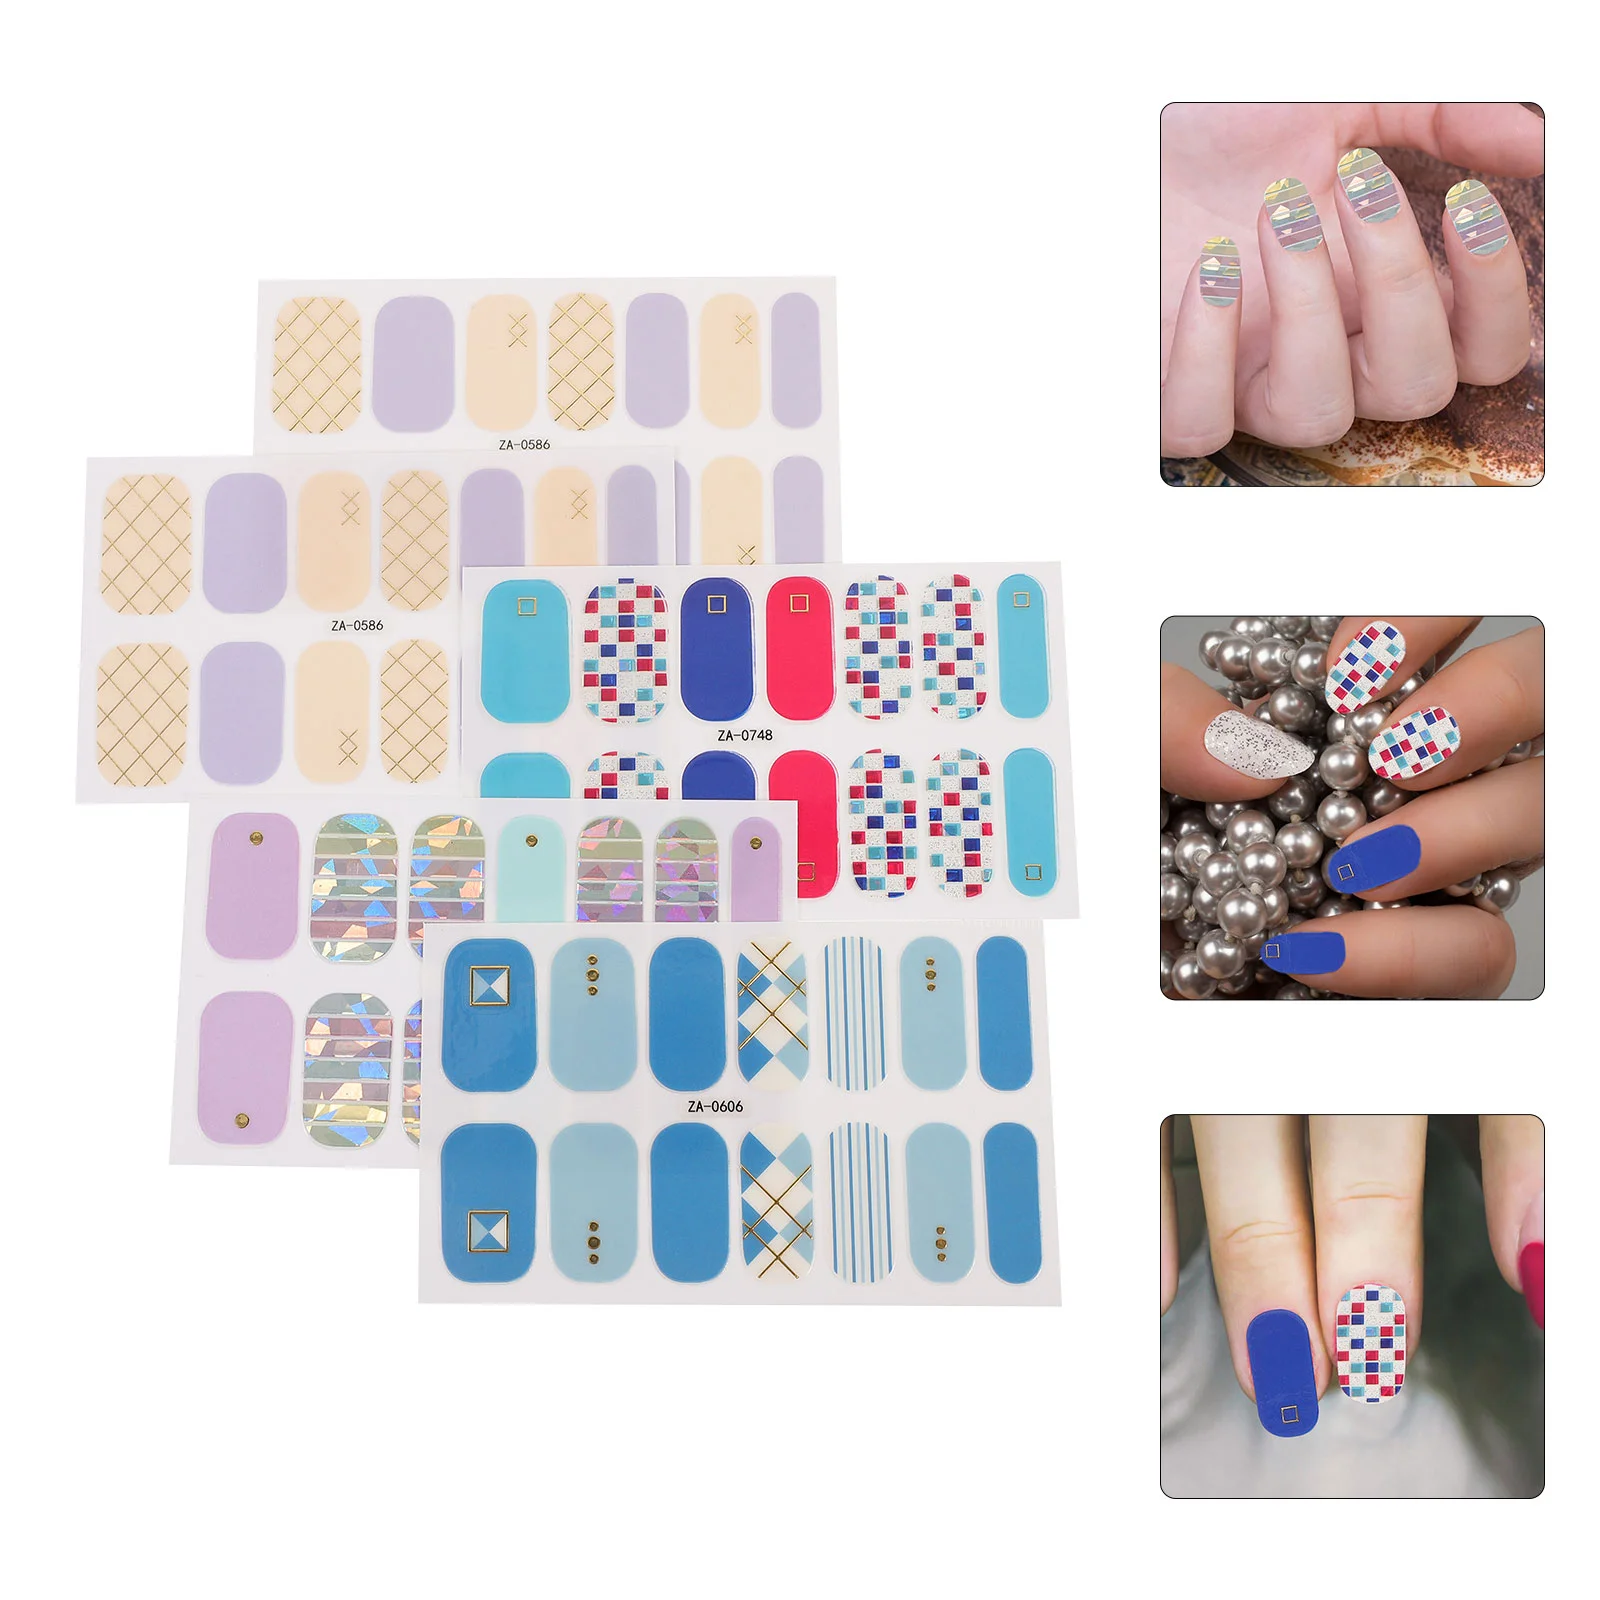 

5 Sheets Nail Stickers Full Wraps Gel Polish Ultra-thin Fingernail DIY Manicure Decals For nails